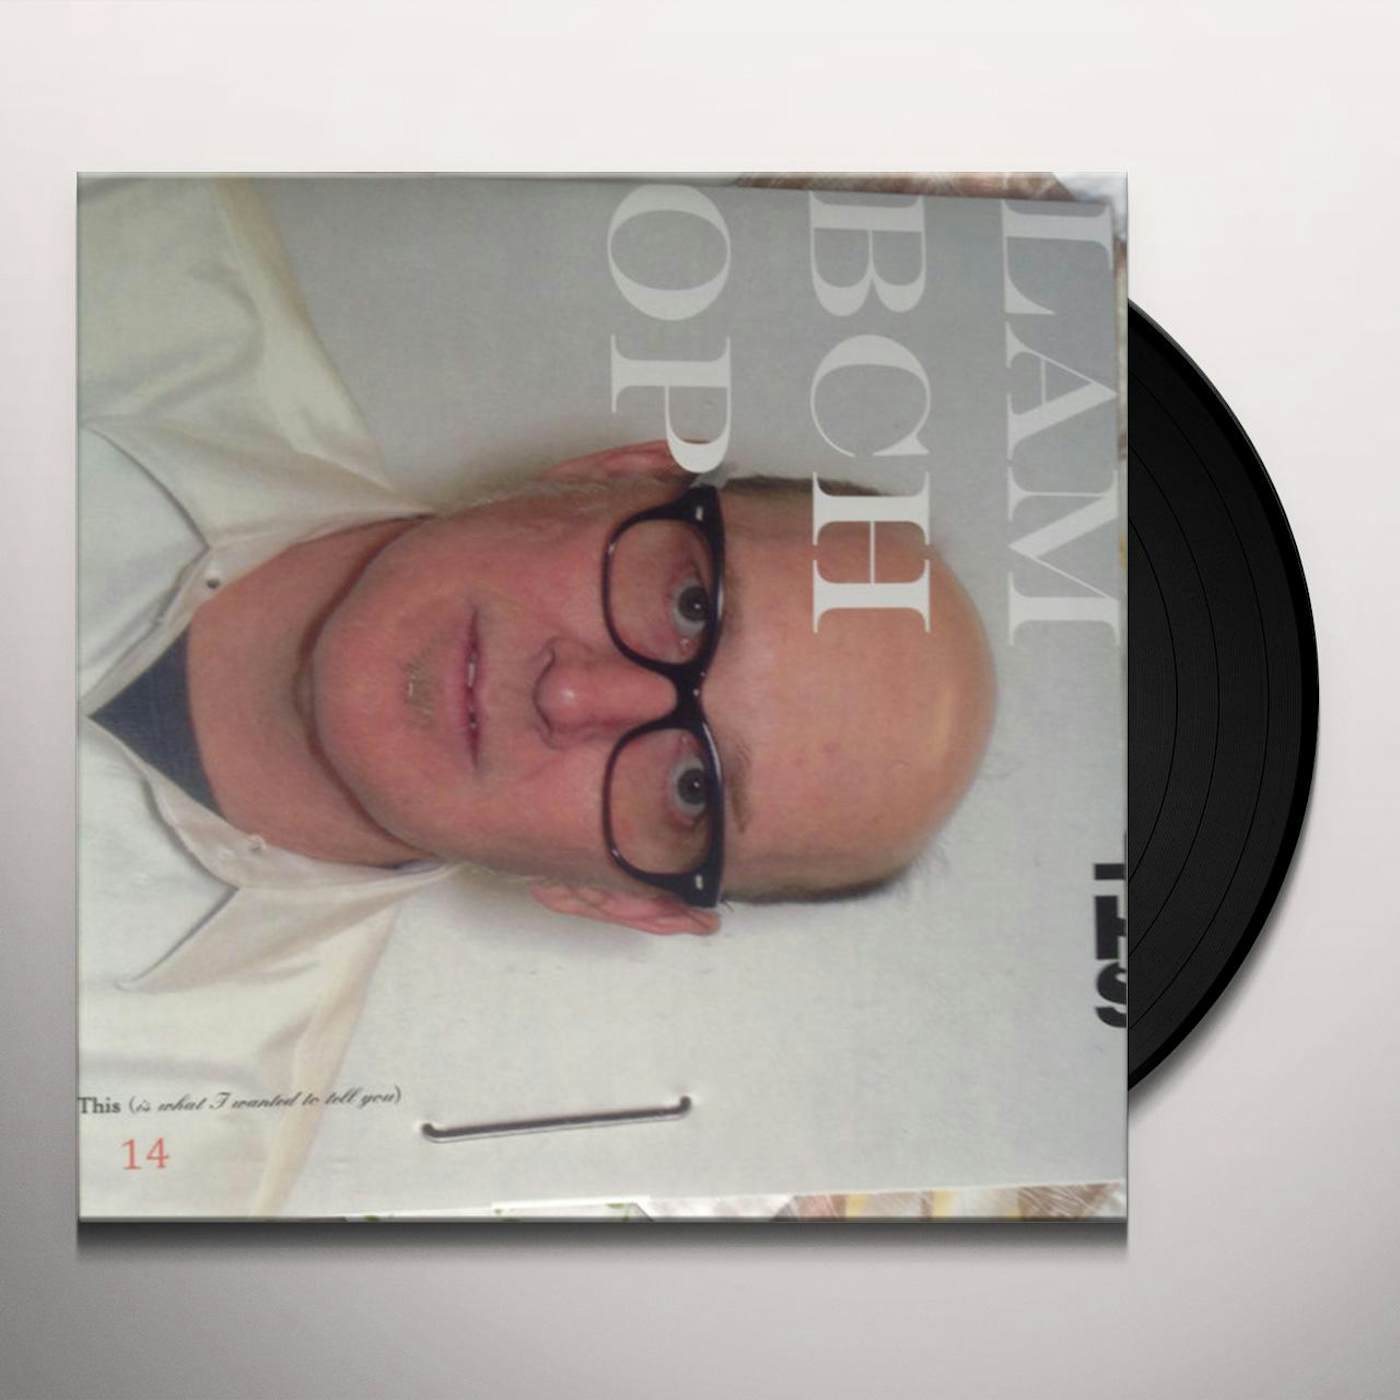 Lambchop This (is what I wanted to tell you) Vinyl Record